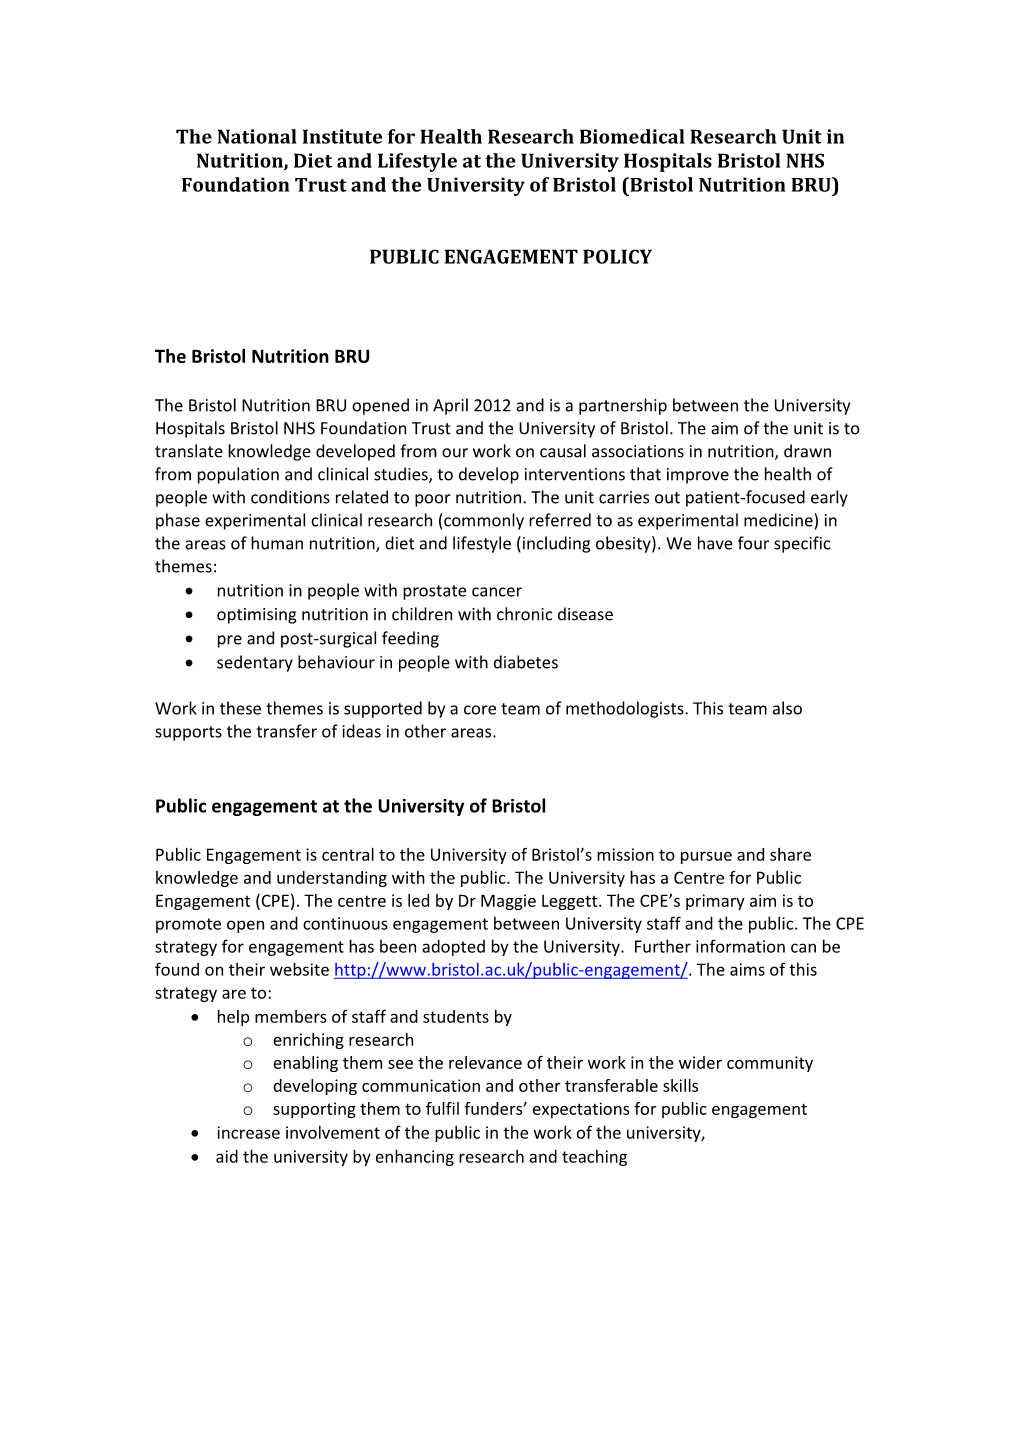 Public Engagement Policy